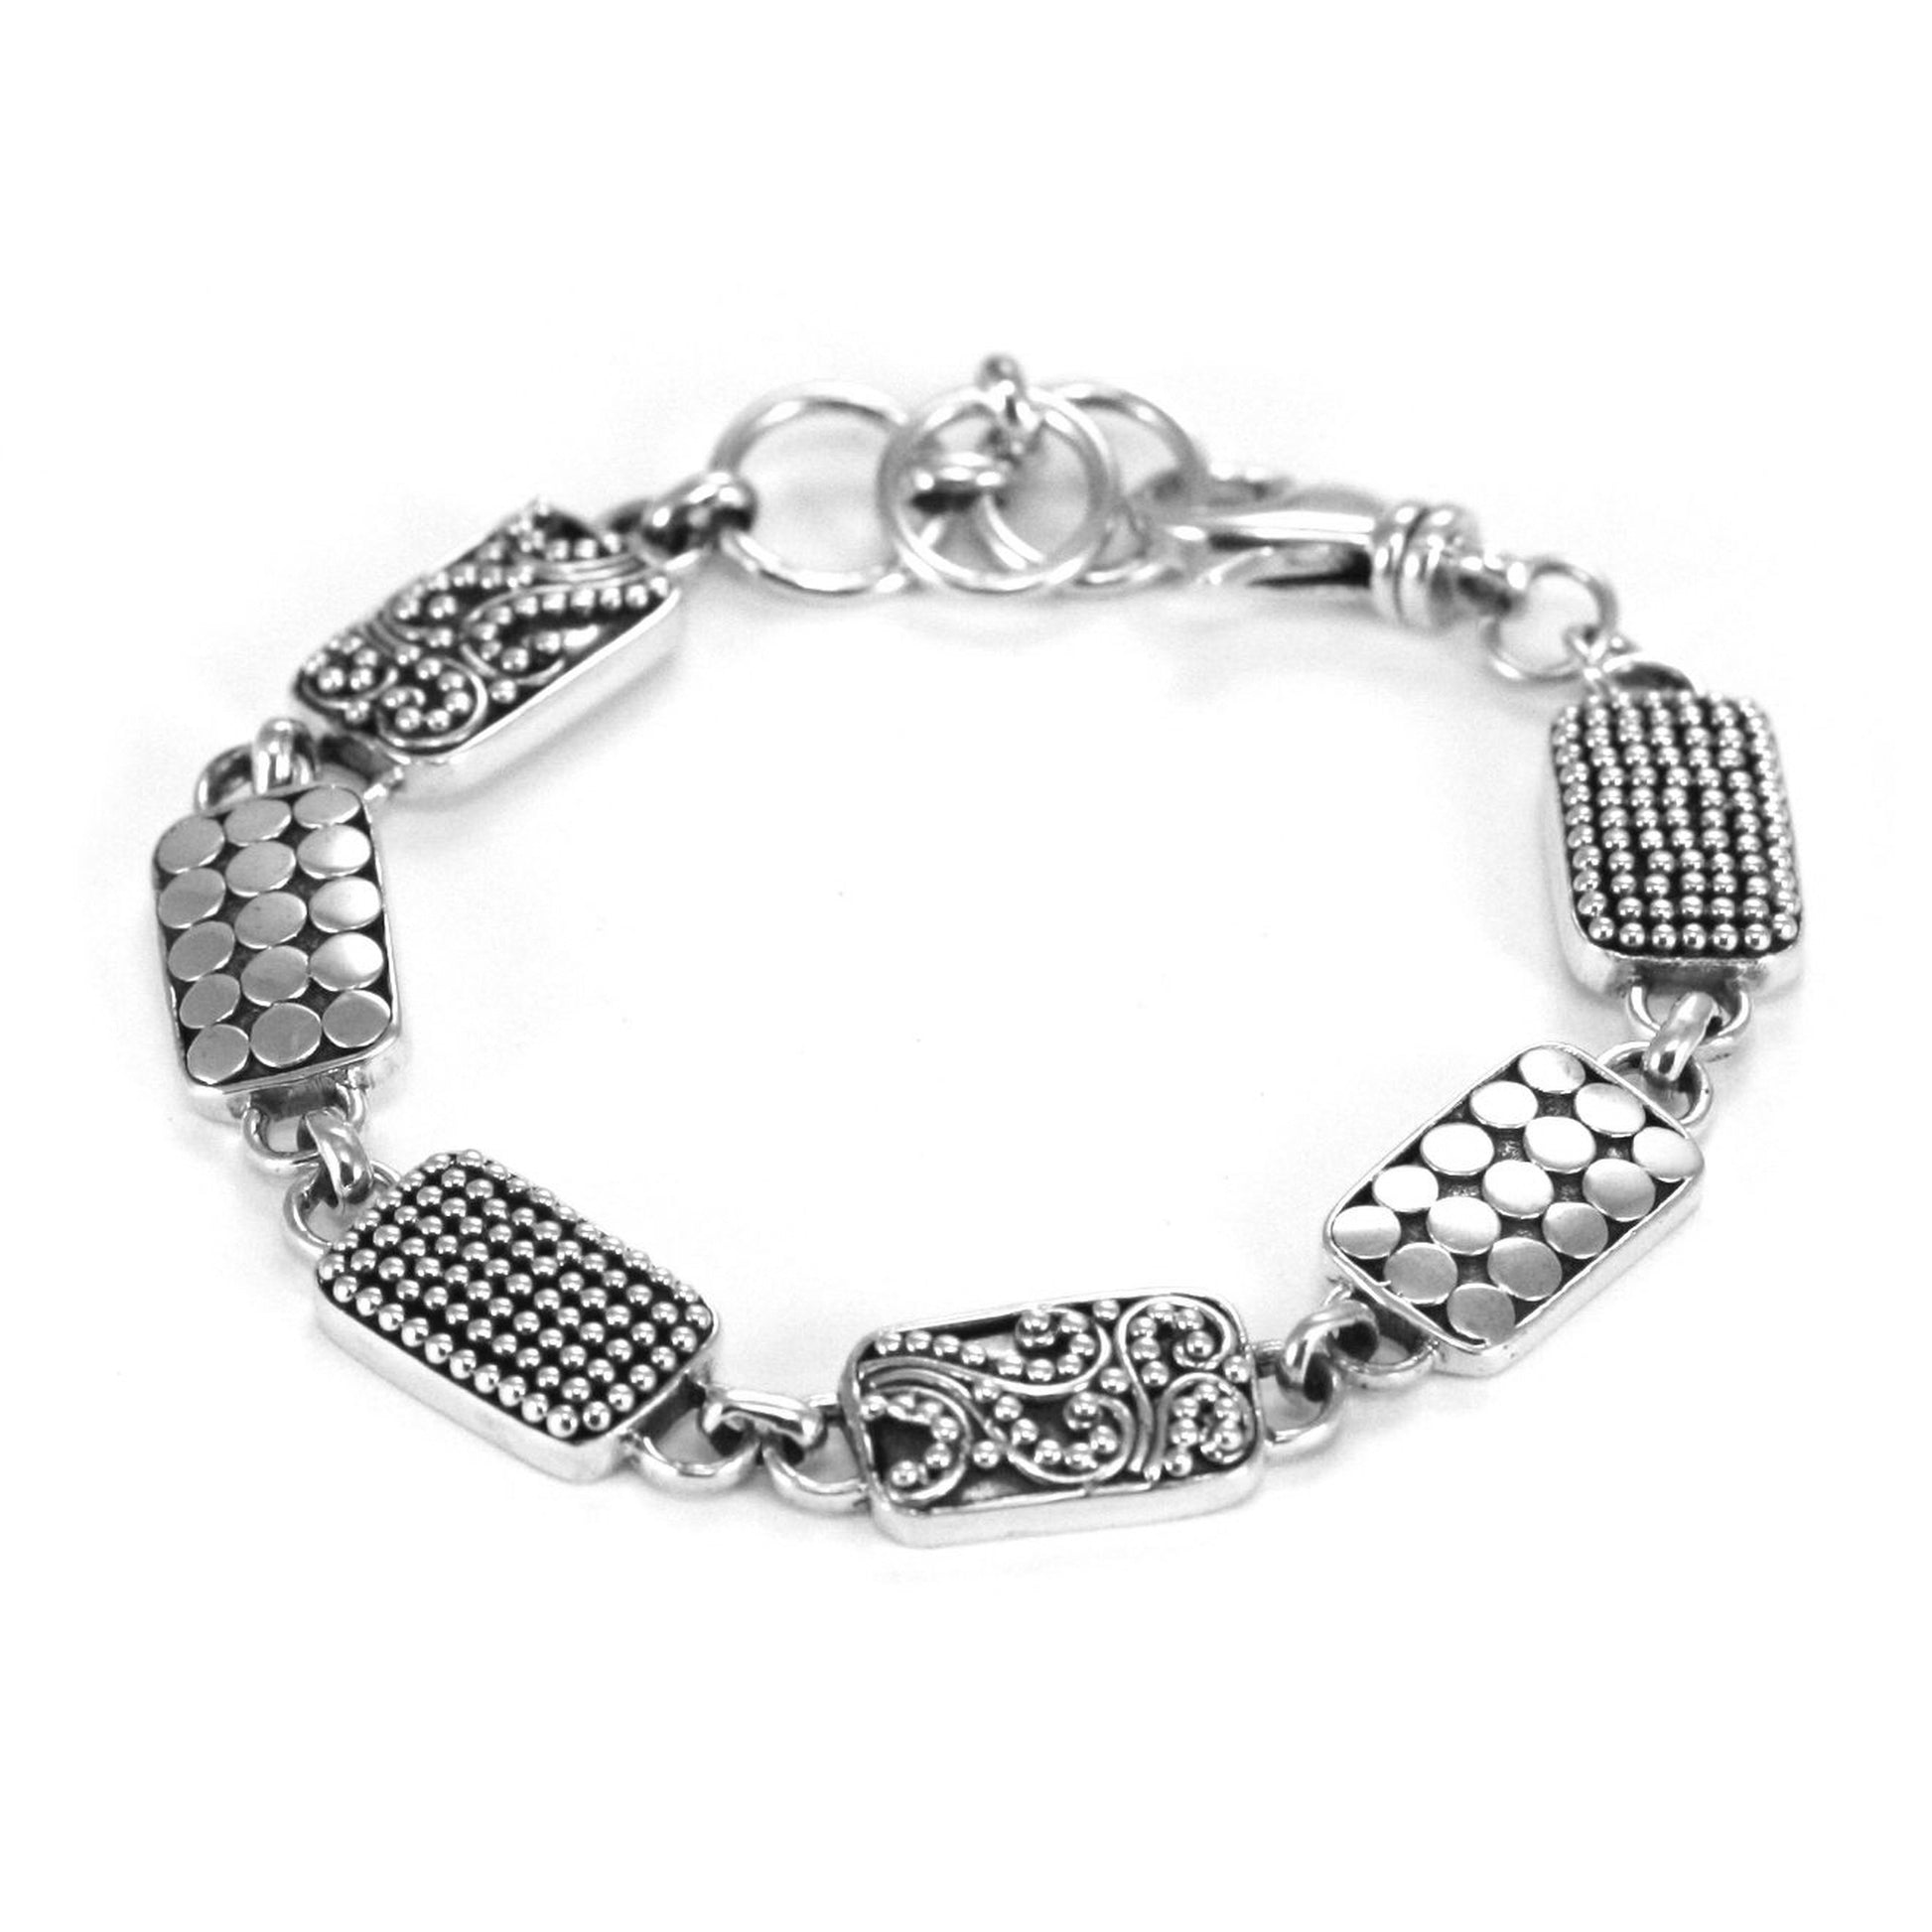 Silver bracelet made of six rectangular links with three different design styles. and a lobster clasp.